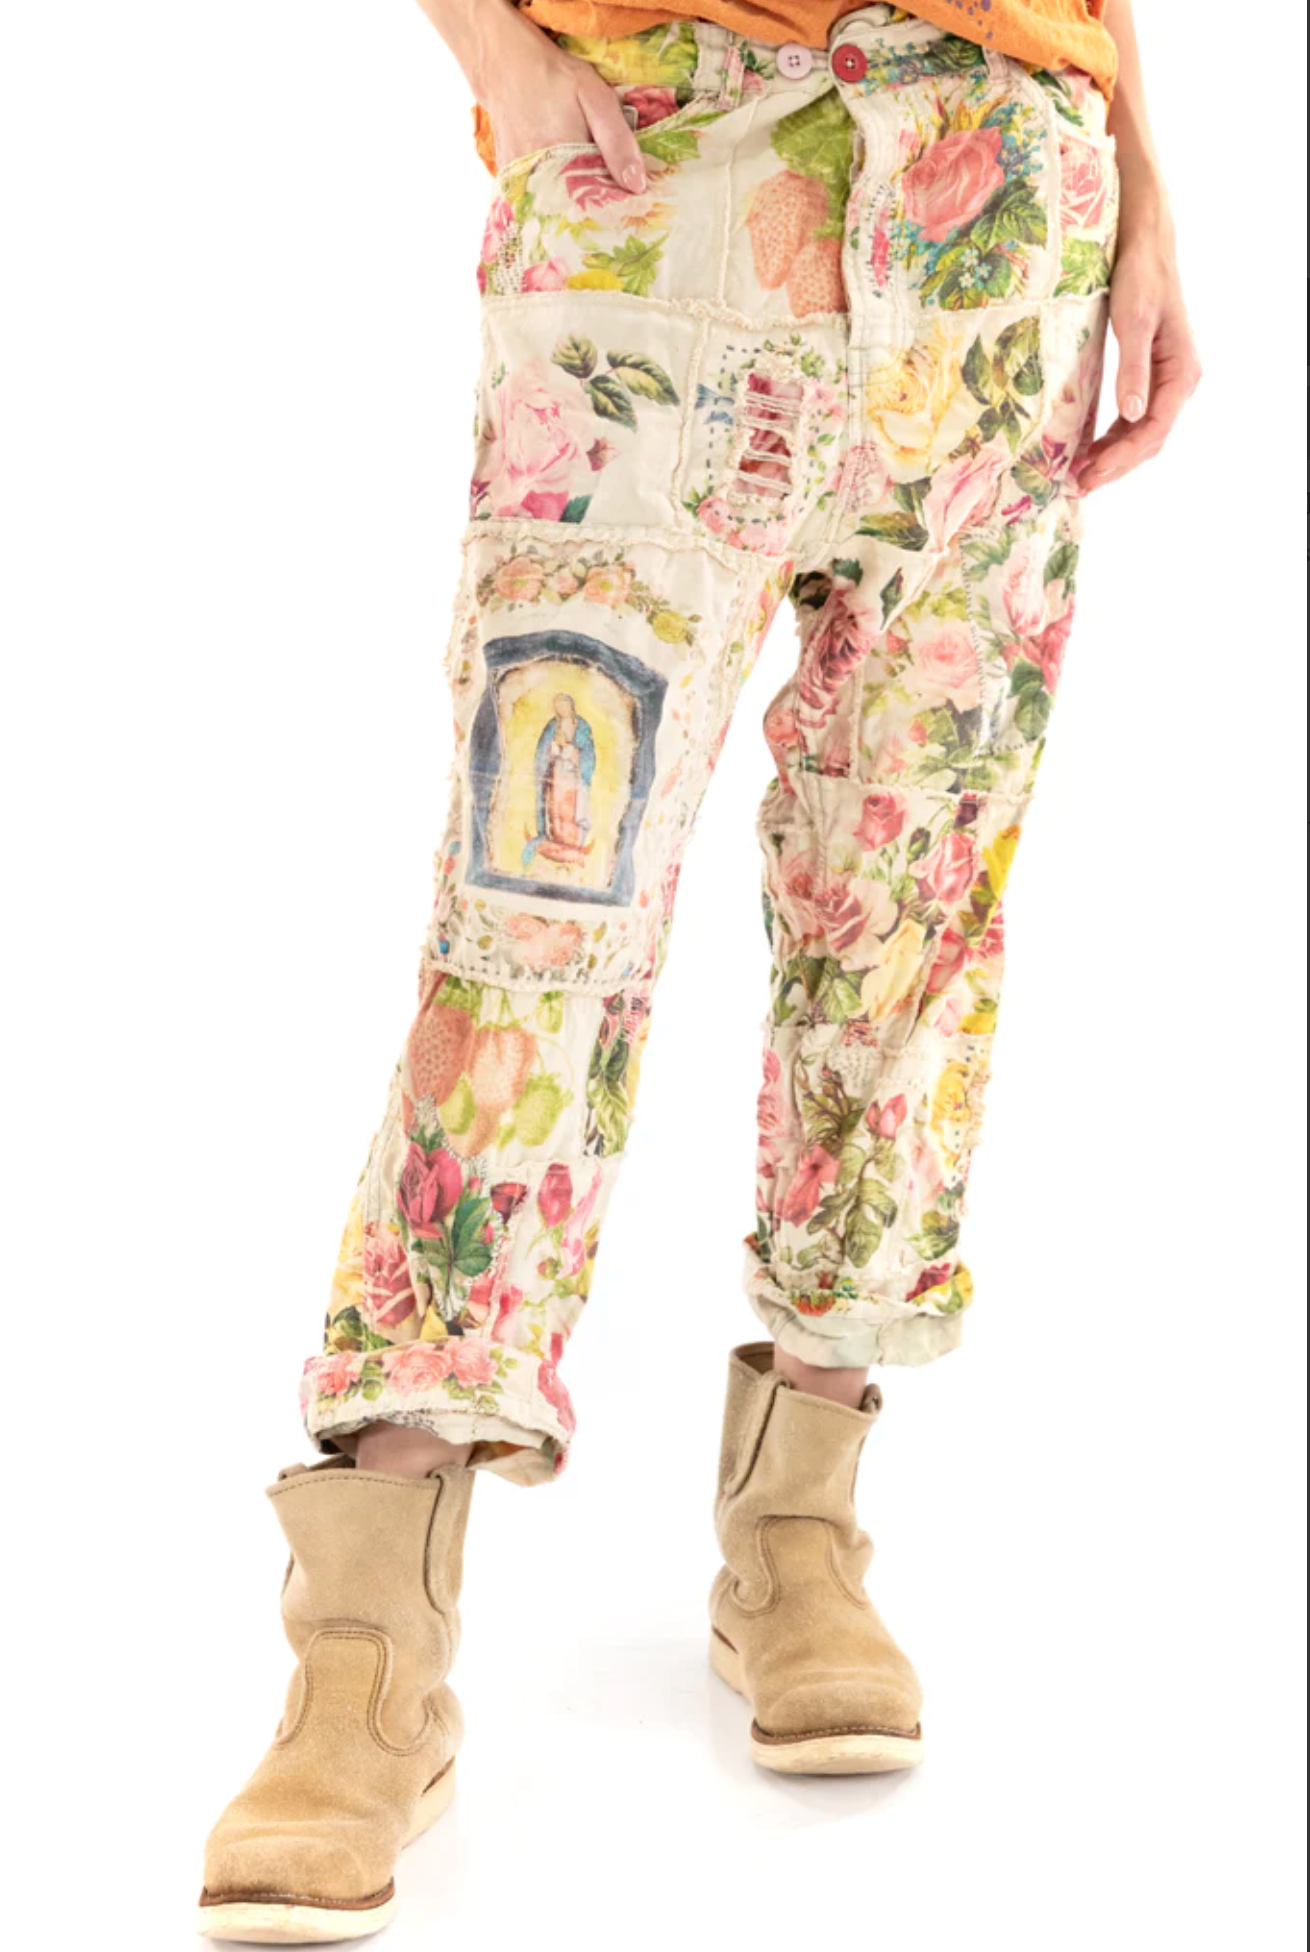 Magnolia Pearl Pants 411 Patchwork Miner Trousers Lady Madonna